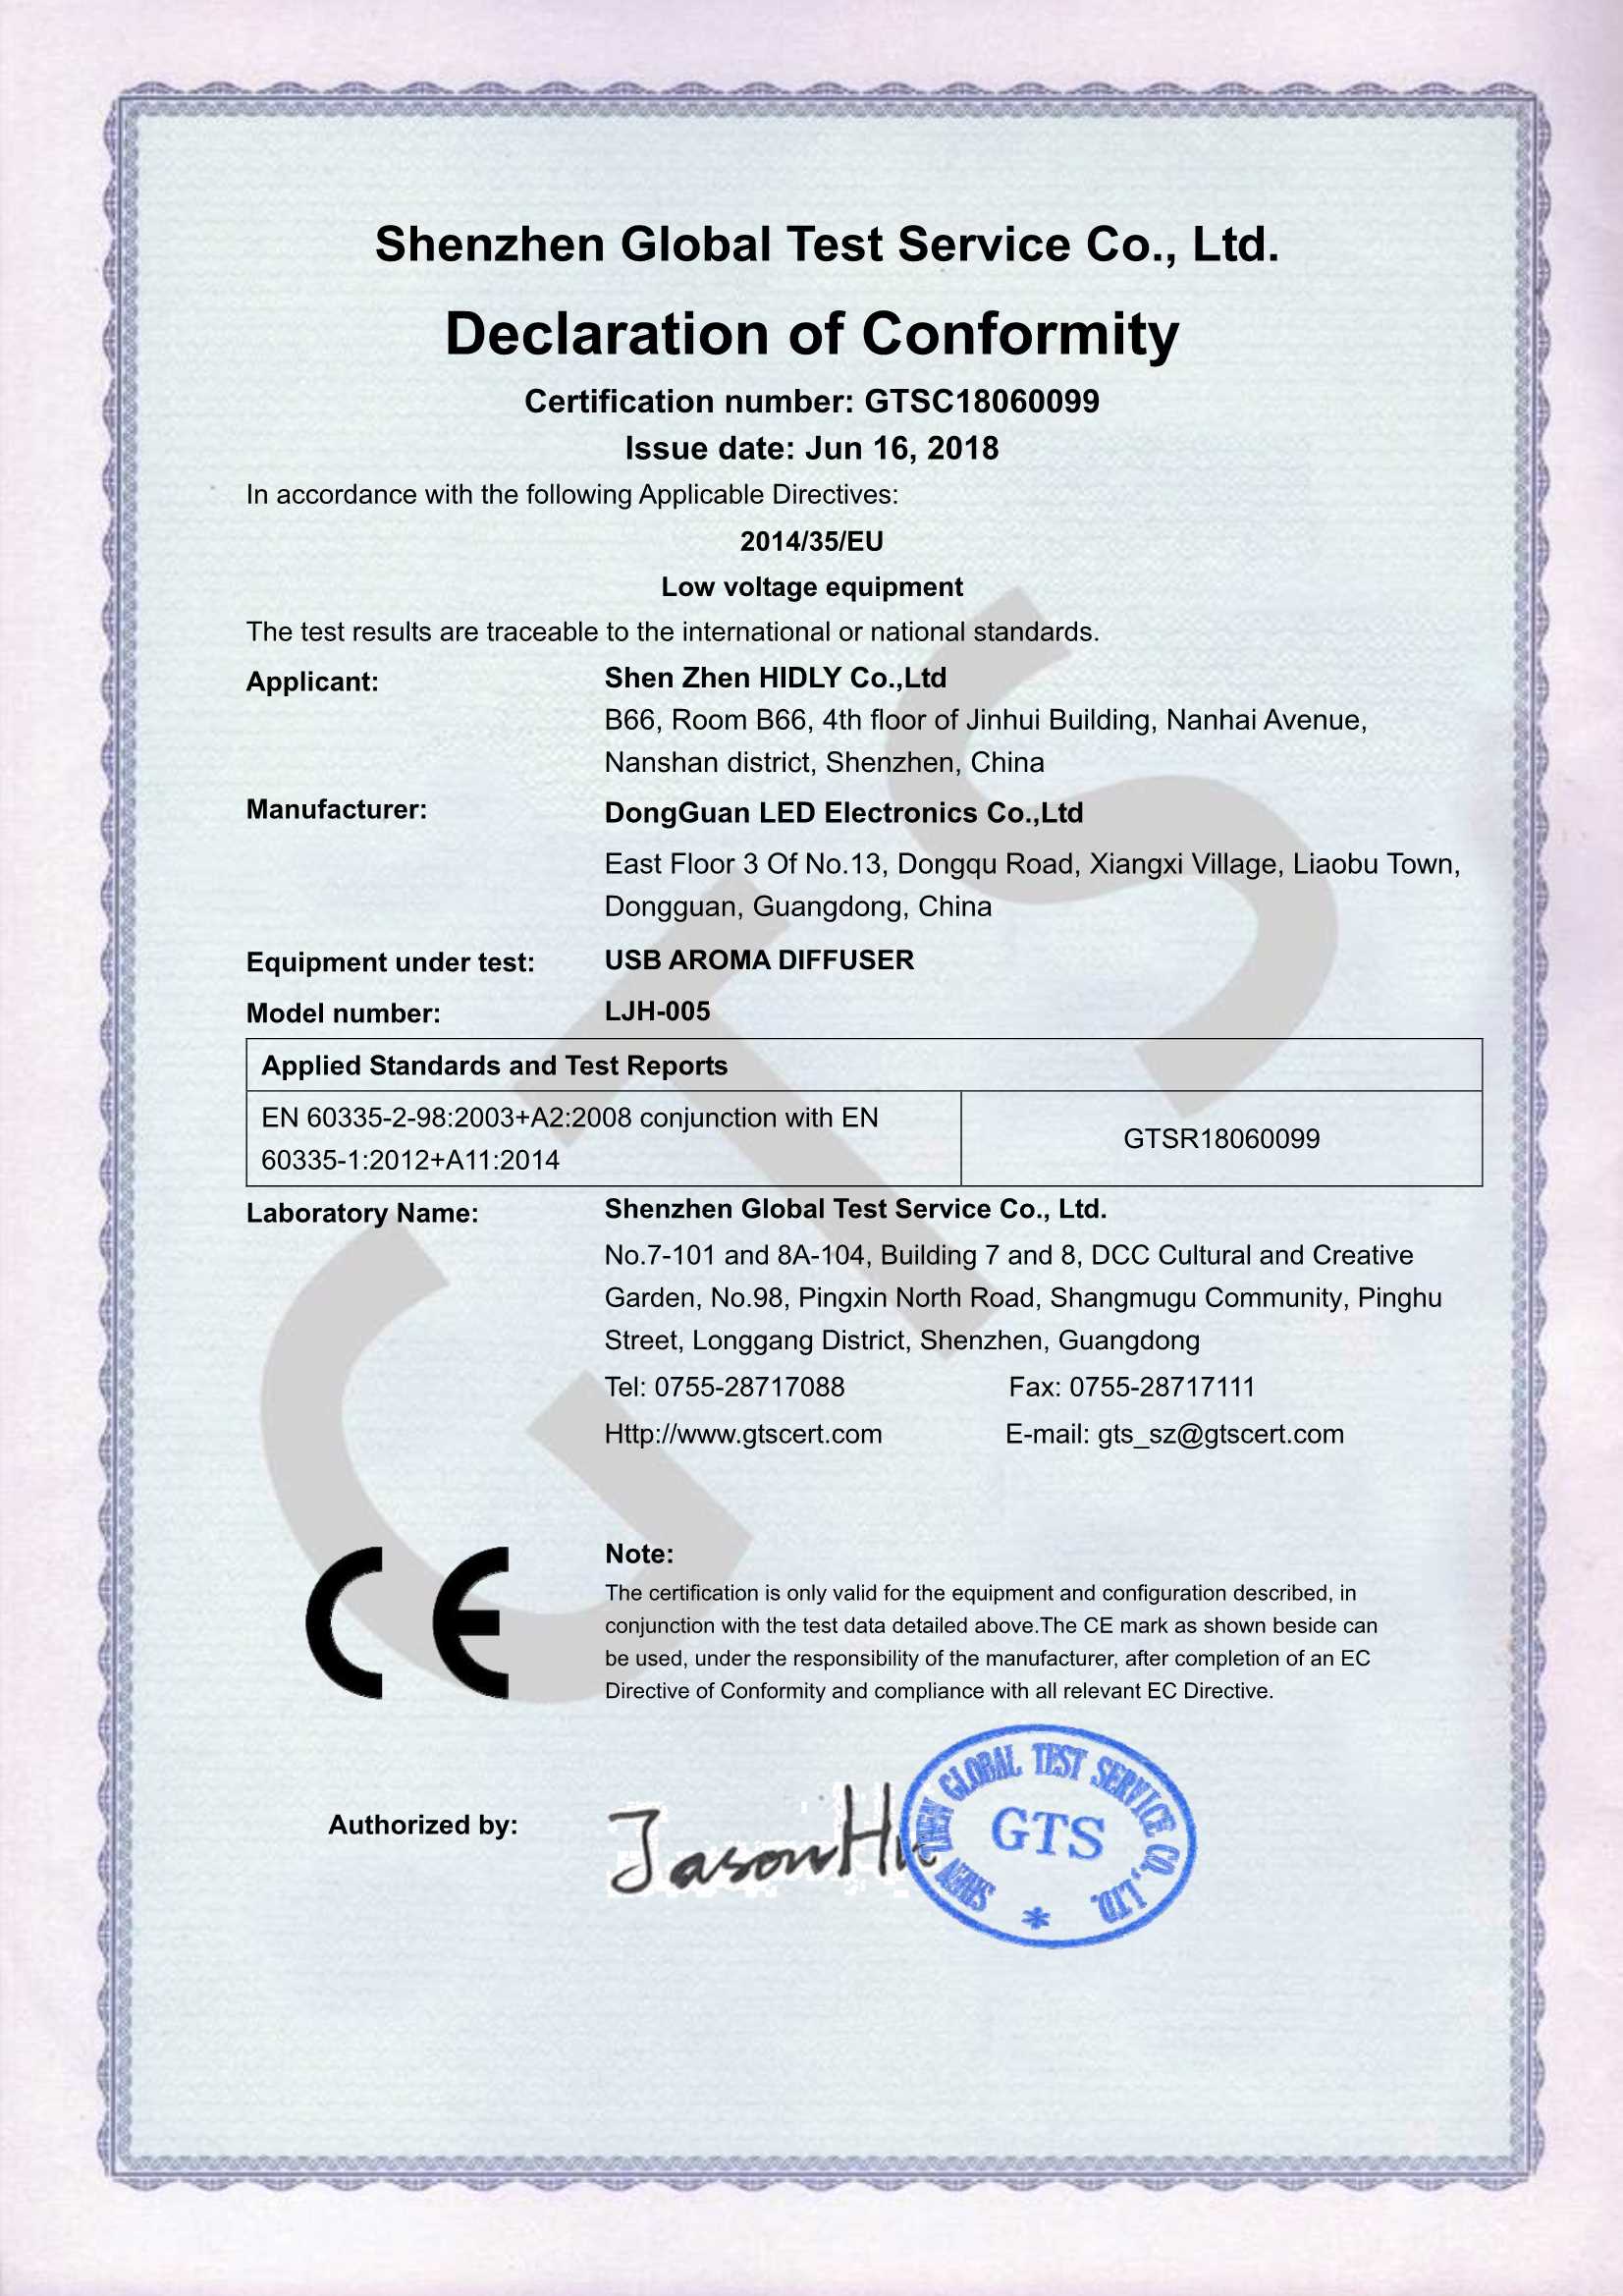 Our aroma humidifier(LJH005)have acquired CE-LVD Certifications: